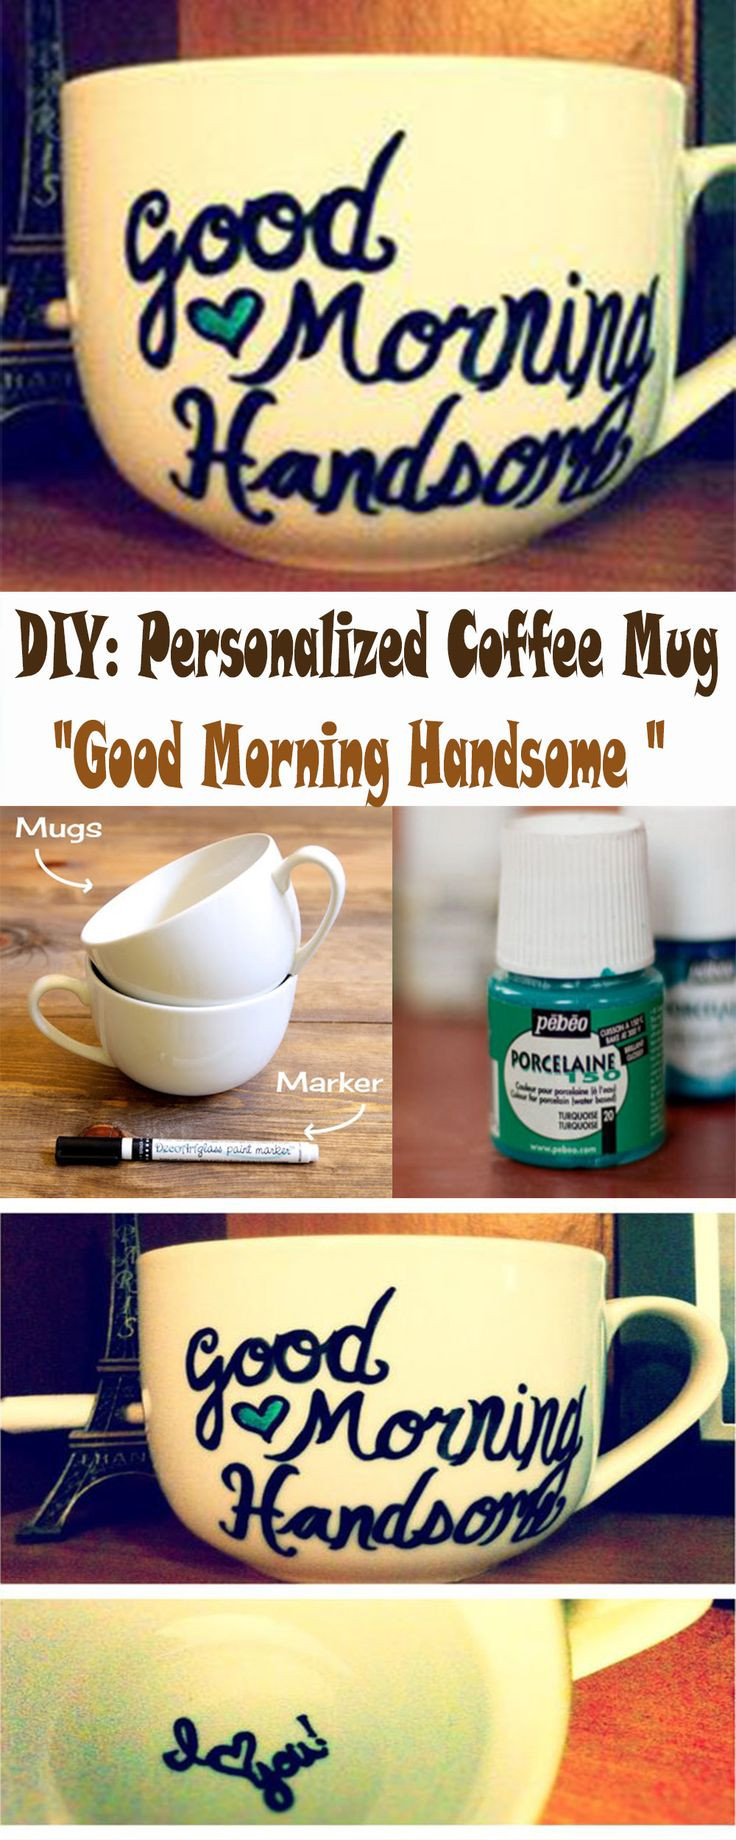 Personalized Gift Ideas For Boyfriend
 1000 images about Boyfriend Gift Ideas on Pinterest